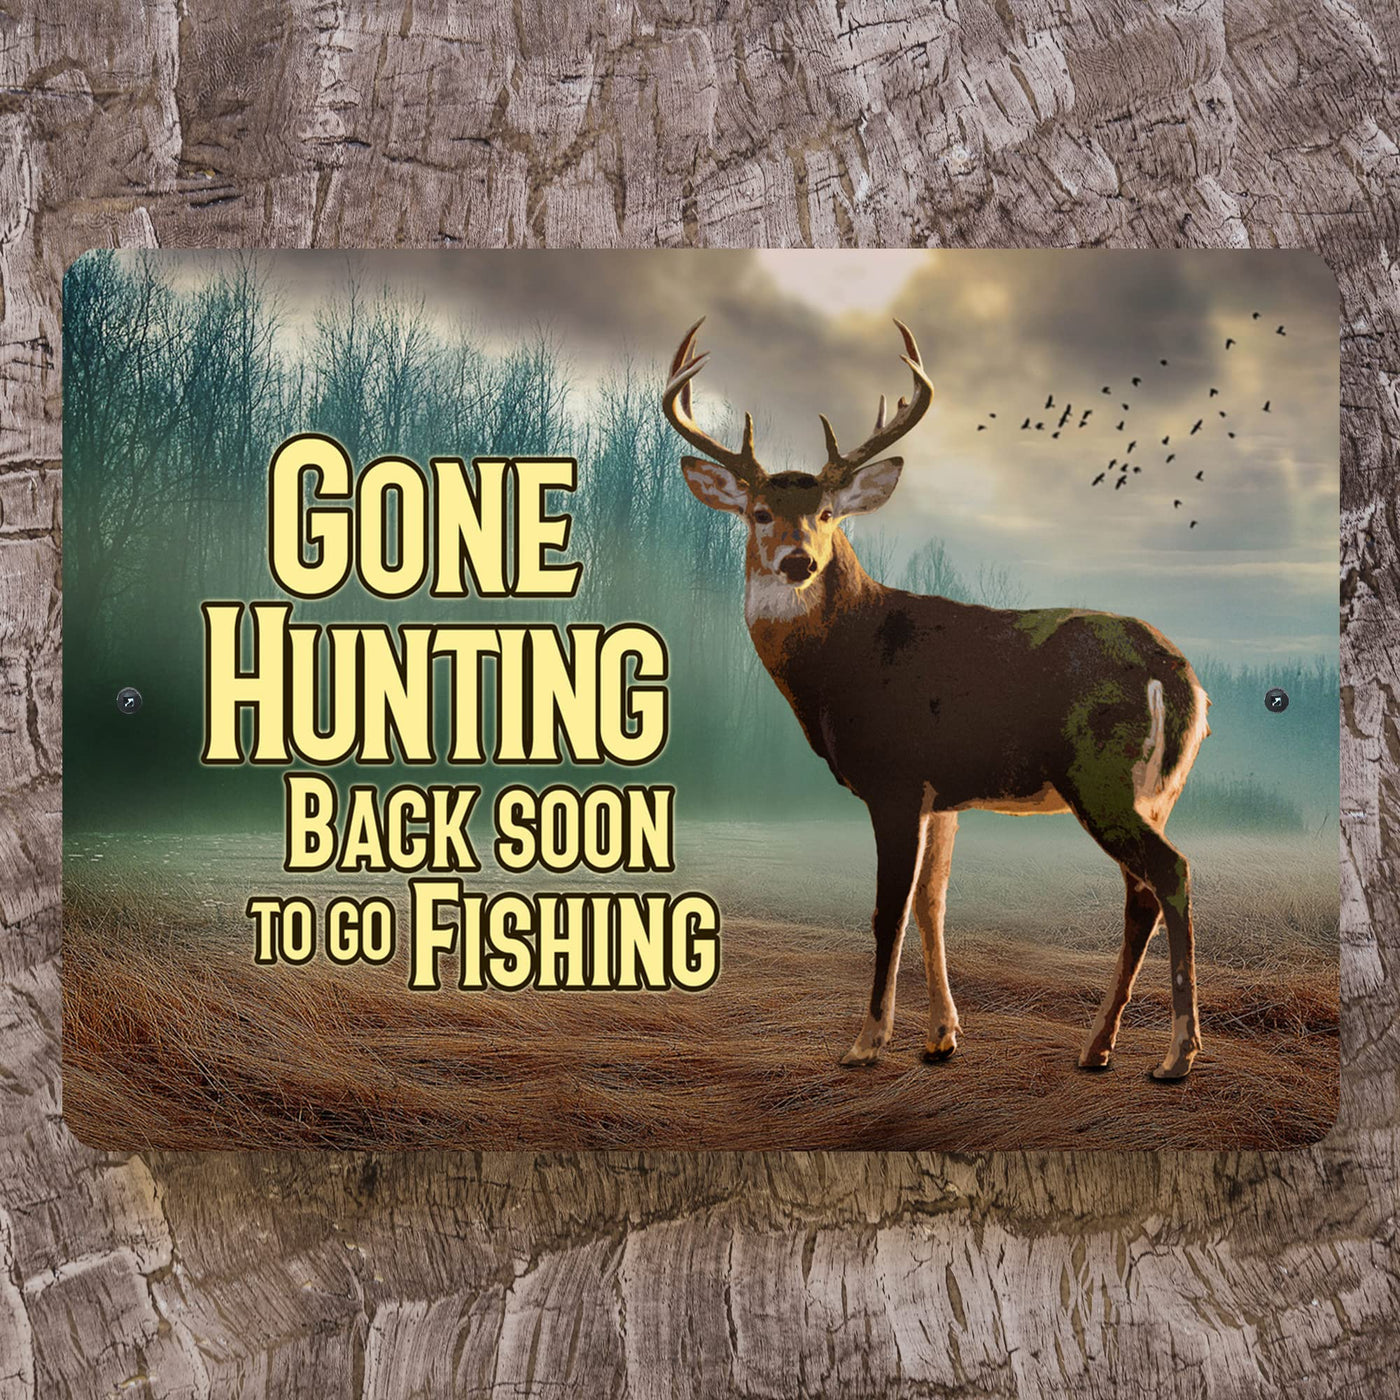 Gone Hunting -Back Soon to Go Fishing Metal Signs Vintage Wall Art -12 x 8  Funny Rustic Outdoor Hunt Sign for Lake House, Patio, Camp, Lodge - Tin